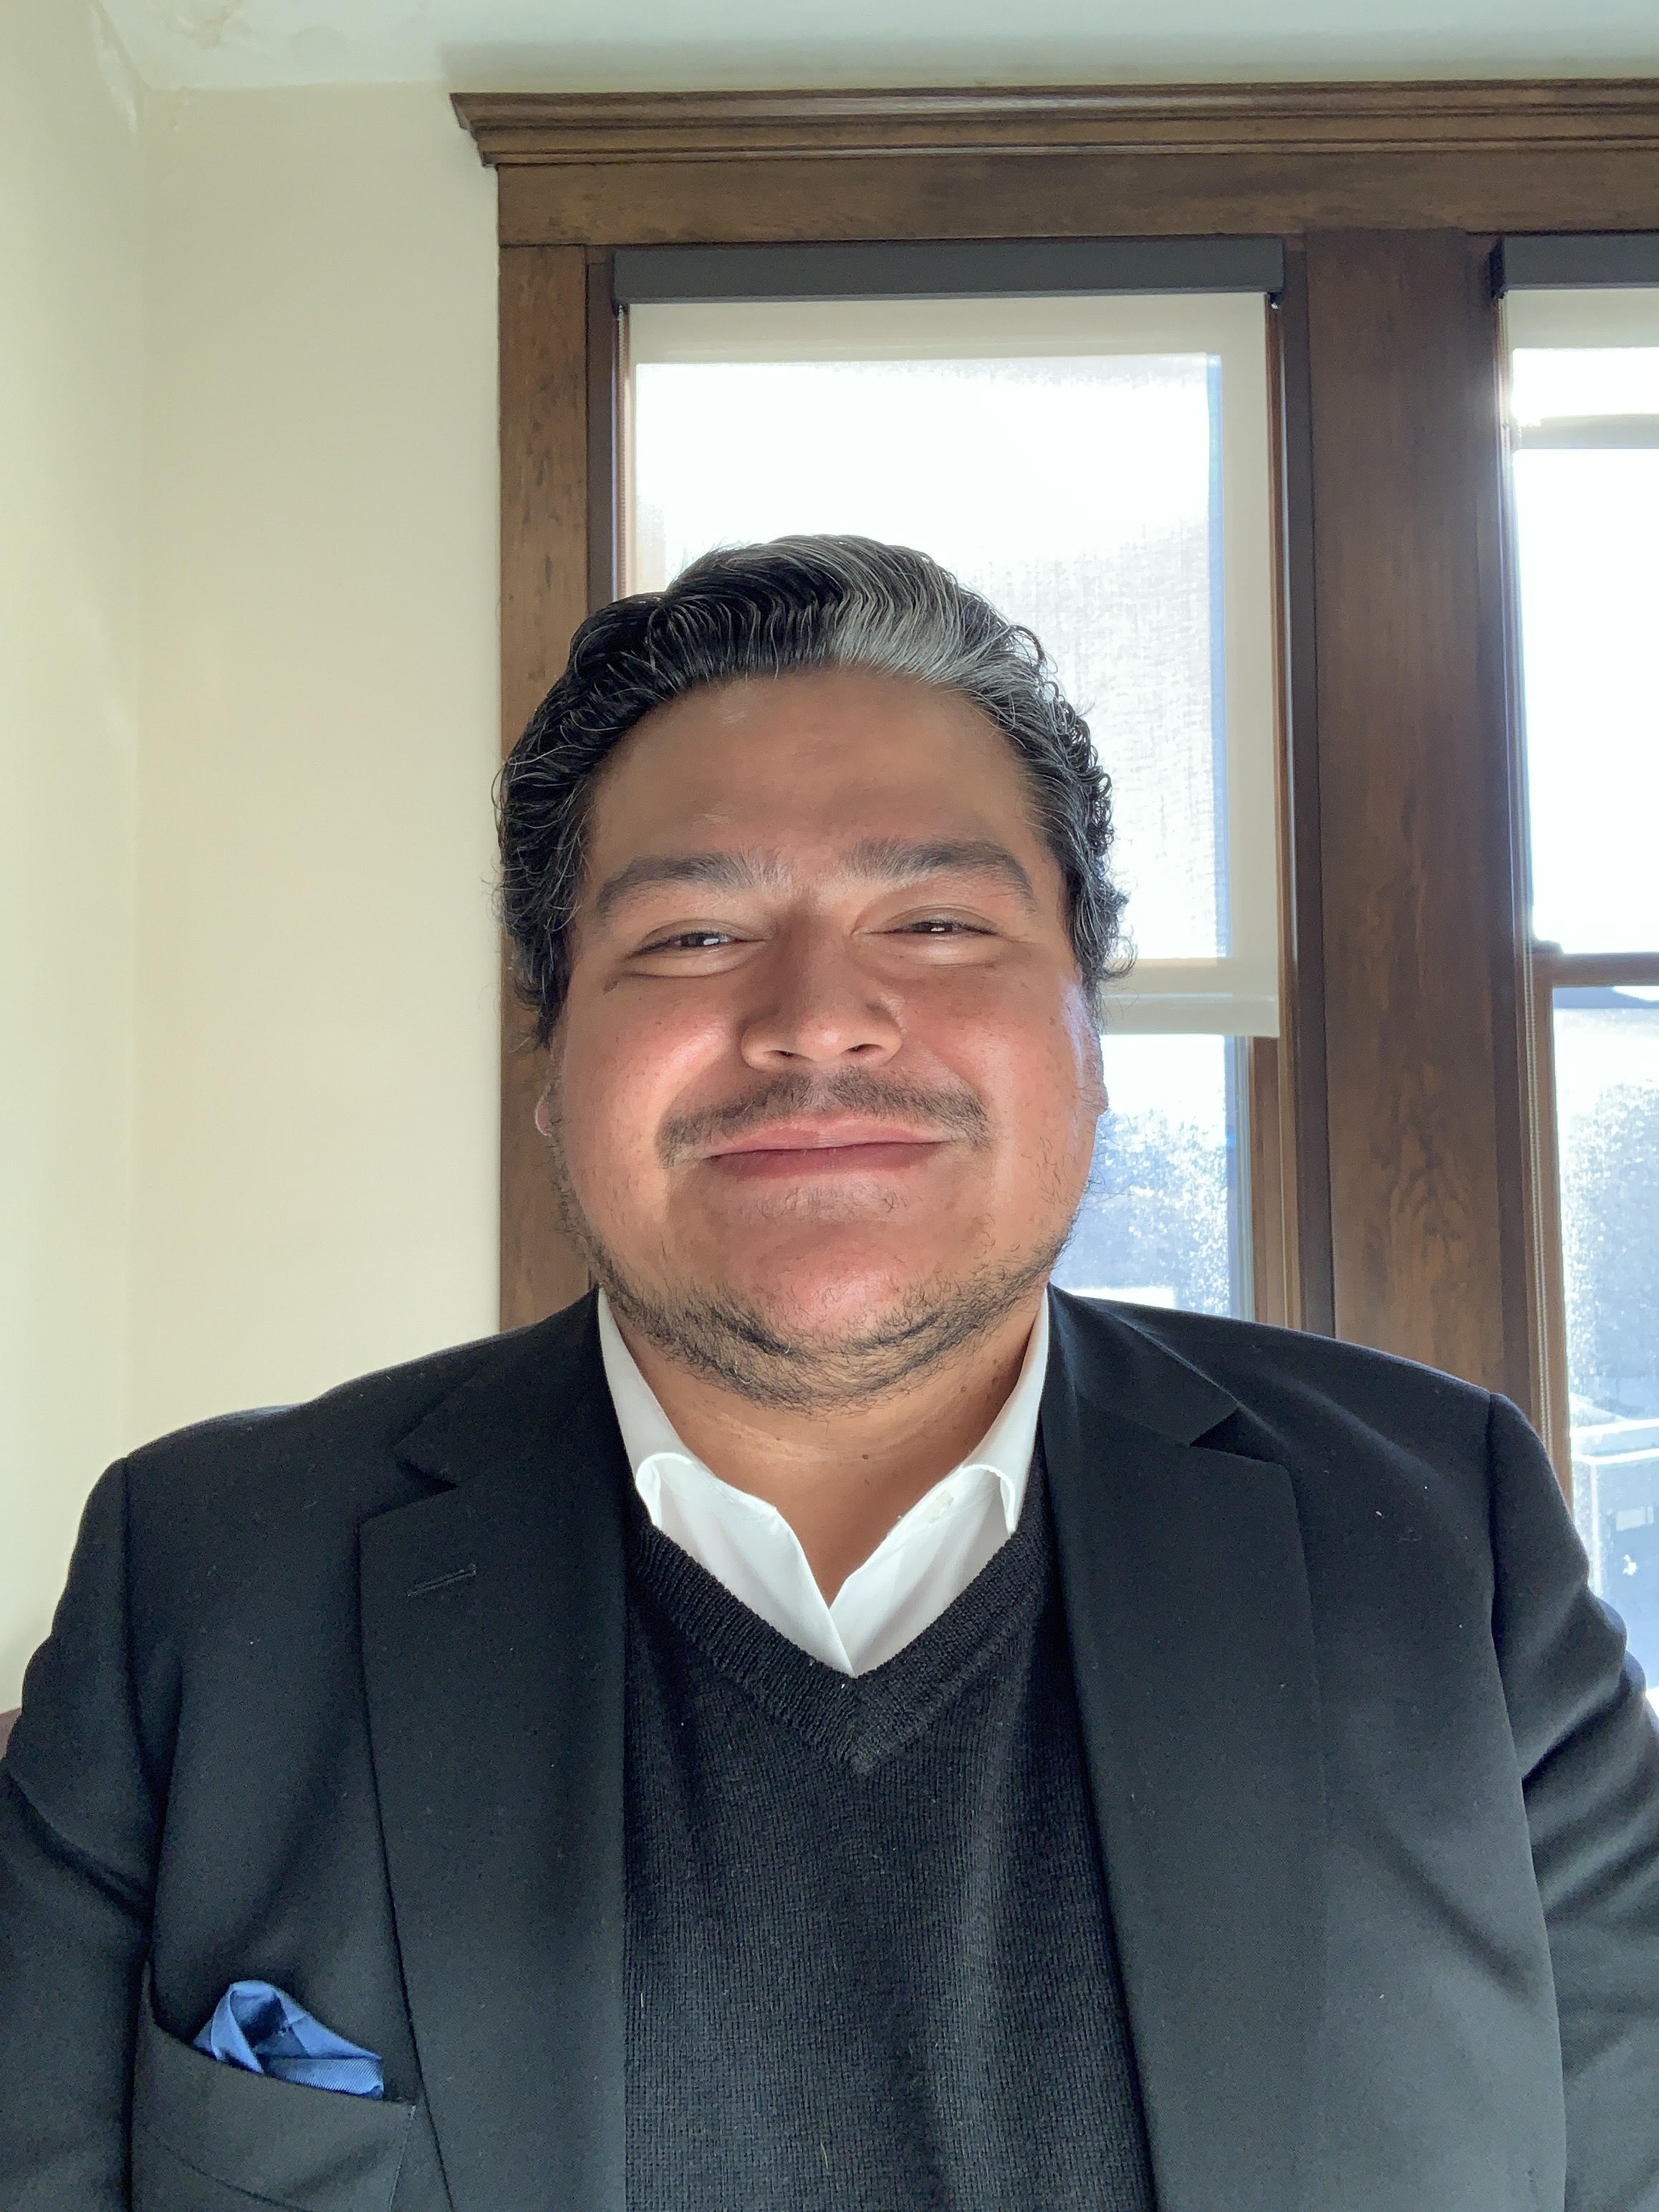 Osiris Aníbal Gómez, a person with short black and grey hair, light brown skin, smiling, wearing a jacket, sweater, and buttoned shirt, standing in front of a window